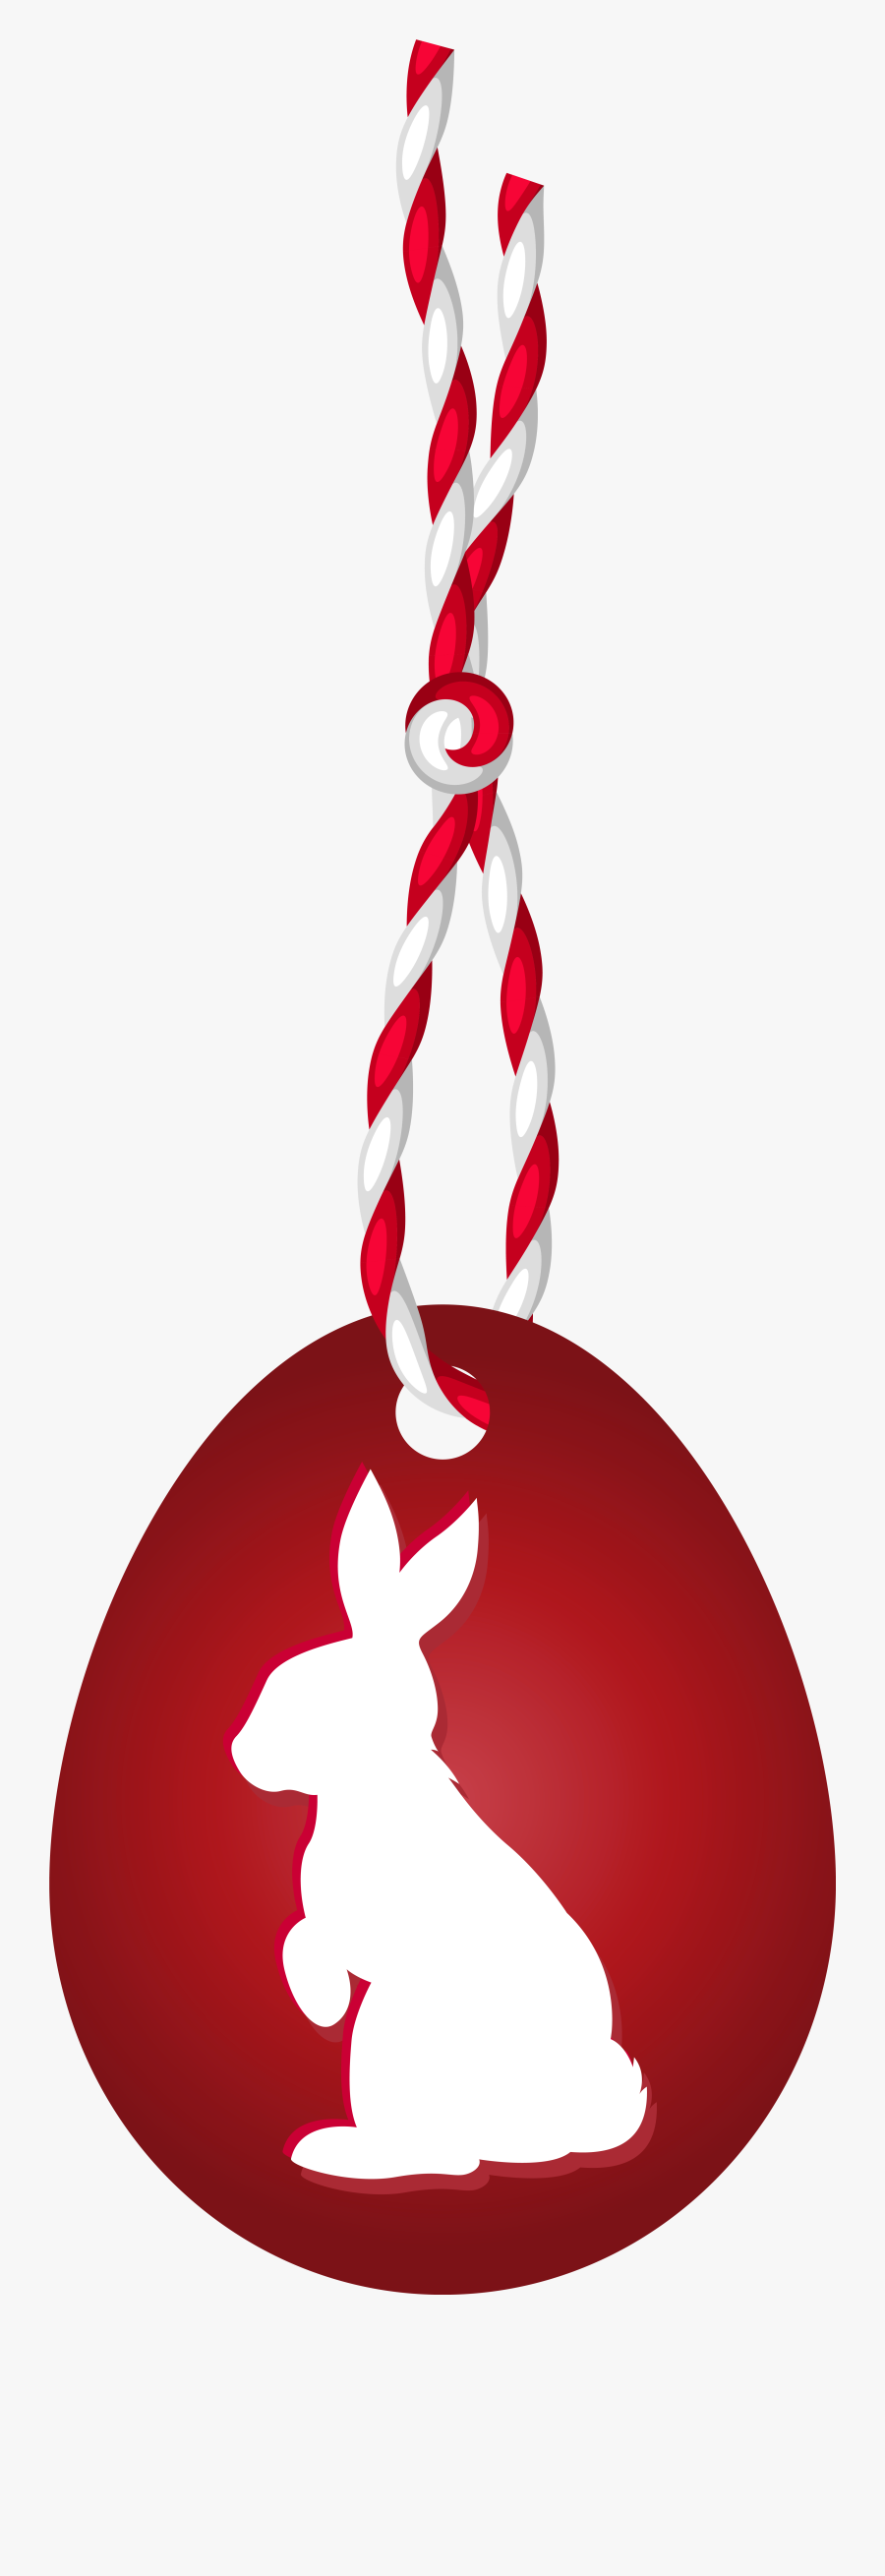 Red Easter Hanging Egg With Bunny Png Clip Art Imageu200b, Transparent Clipart